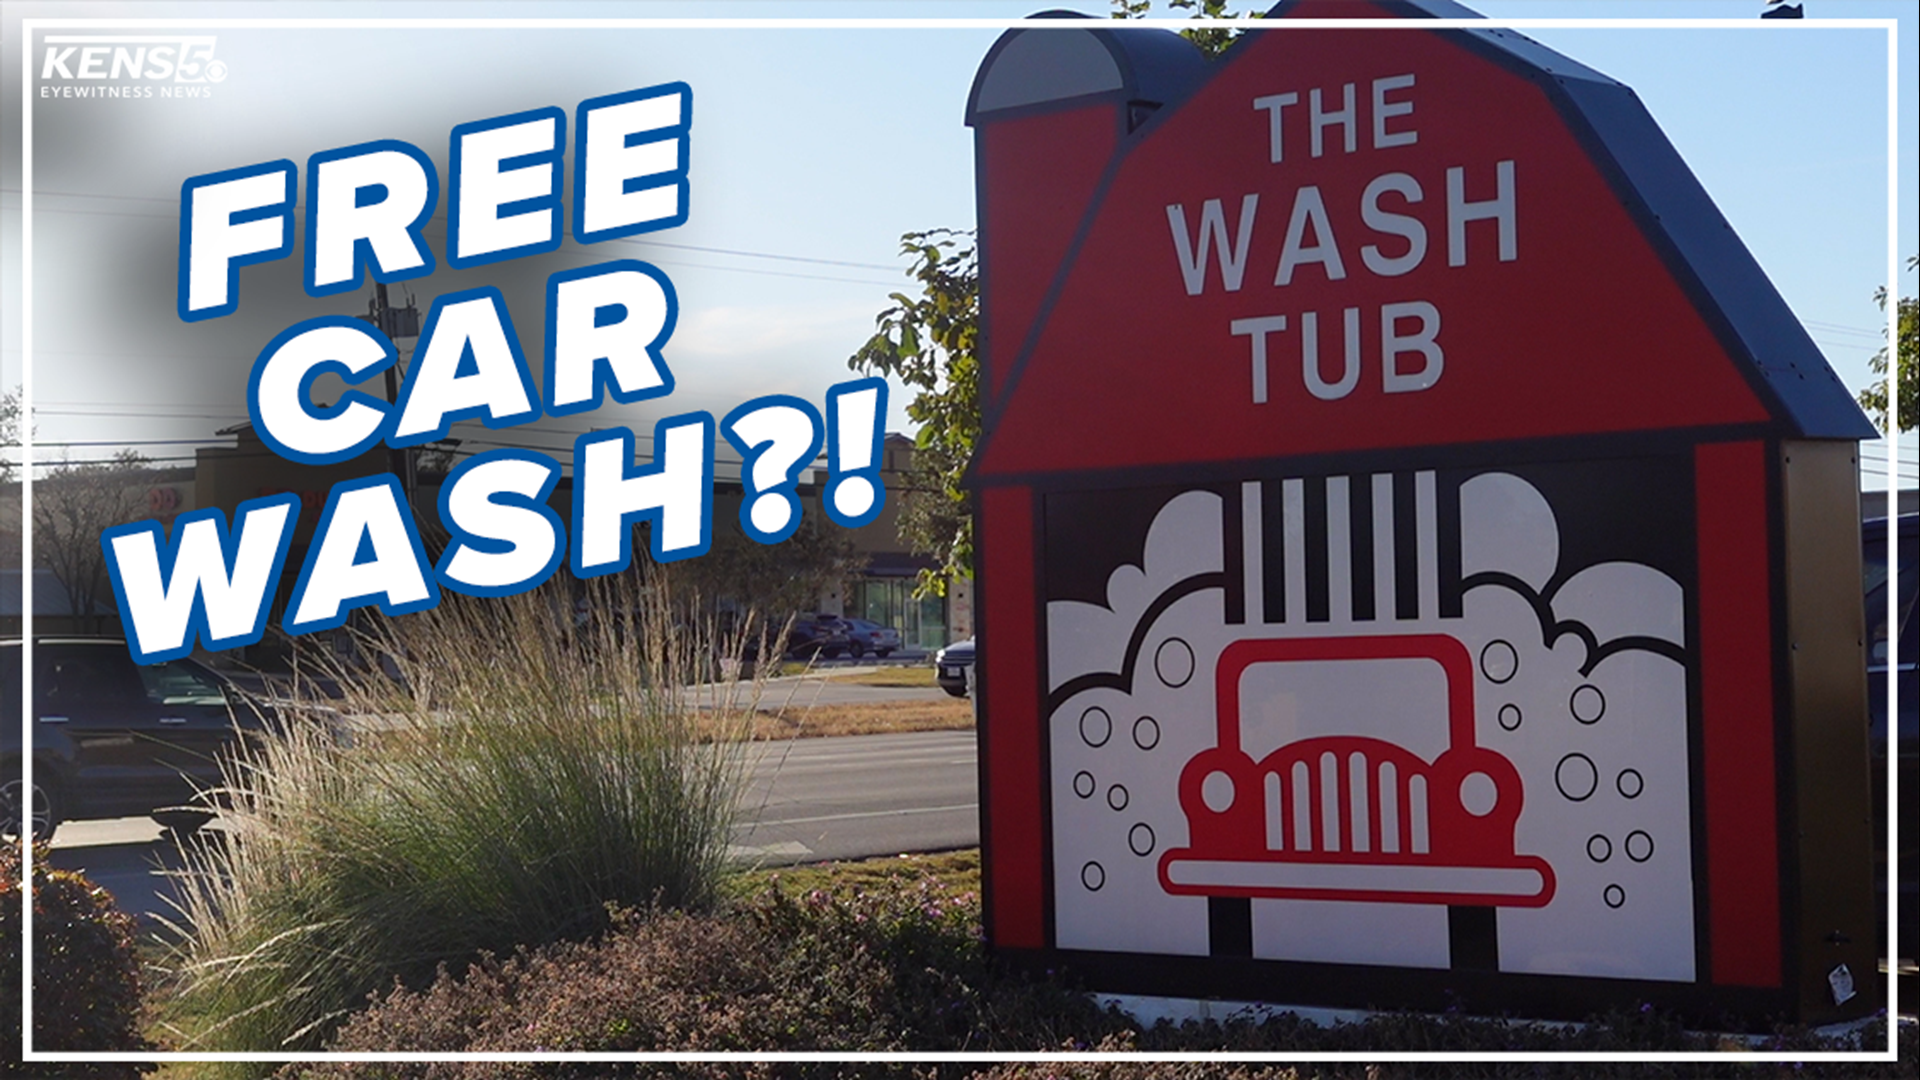 If you need a car wash and you're a front line worker, The Wash Tub wants to gift you a free wash and vacuum this holiday season.